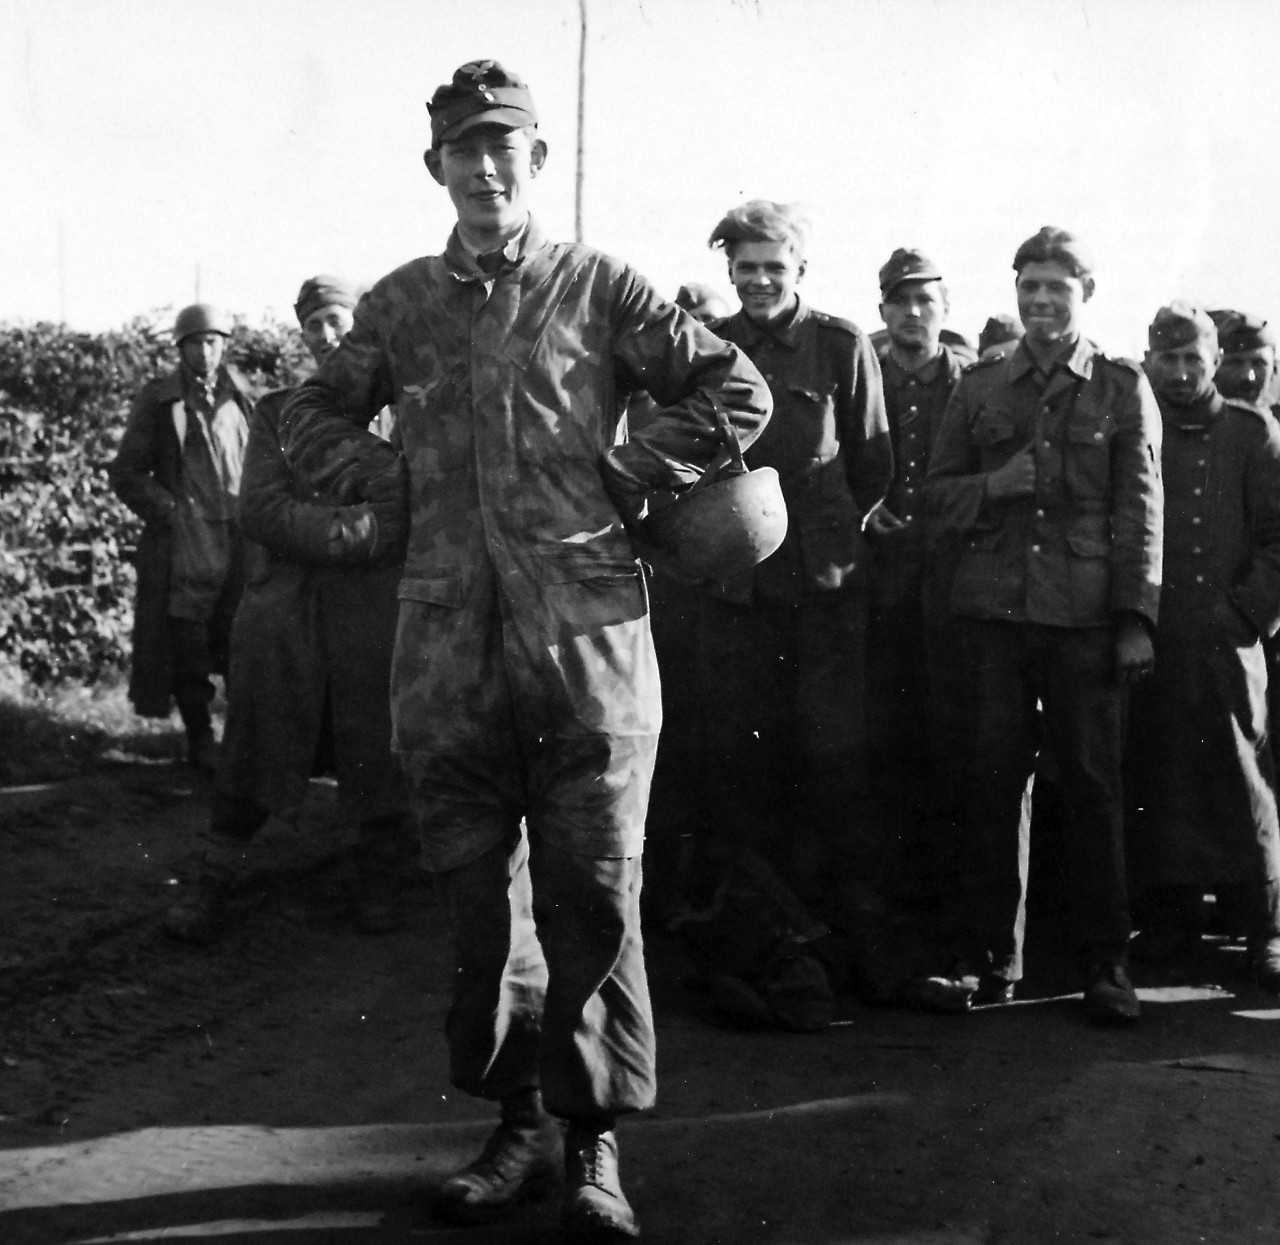 80-G-58427:  Battle of Anzio, January-June 1944.    German prisoners at Anzio, Italy.  A Lieutenant in Nazi paratrooper forces steps out to pose.  These prisoners were captured during the battle for the beachhead at Anzio.     Photographed March 3 1944.  Official U.S. Navy photograph, now in the collections of the National Archives.  (2016/06/28).